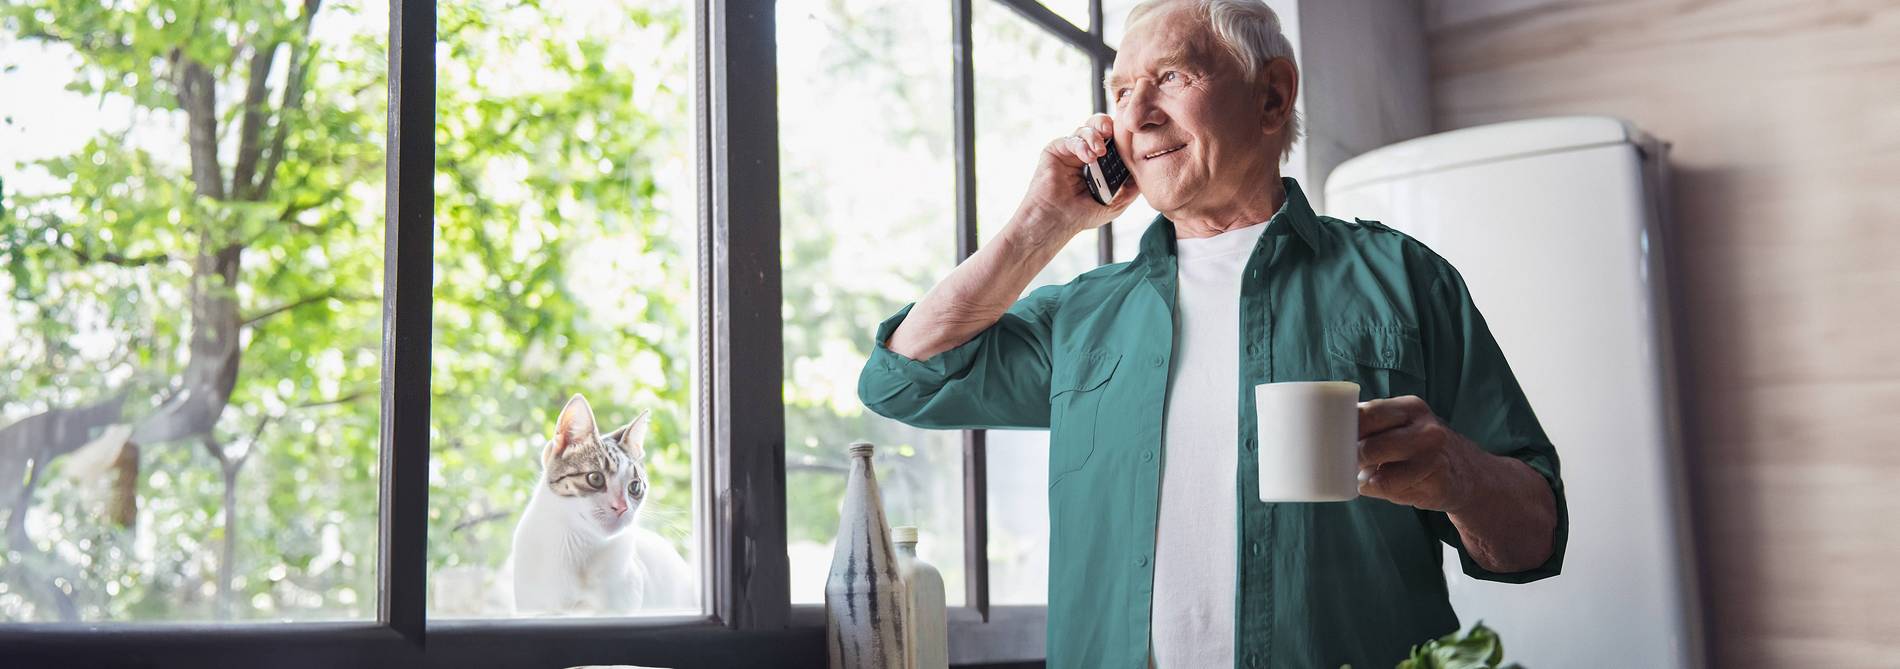 Man calls with his landline phone from Green